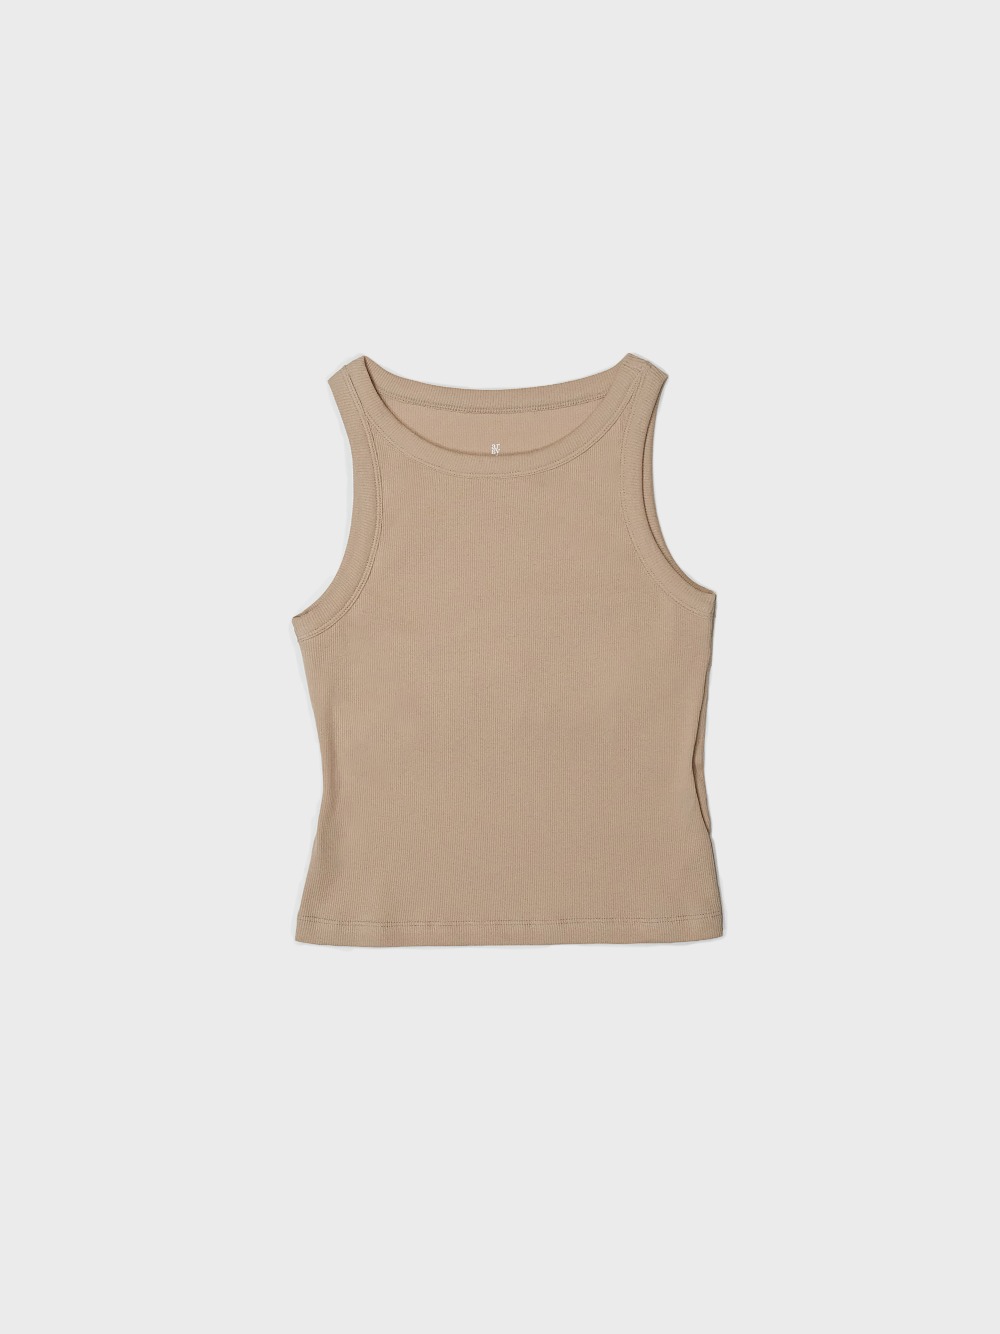 (*New color) Cotton sleeveless top - beige